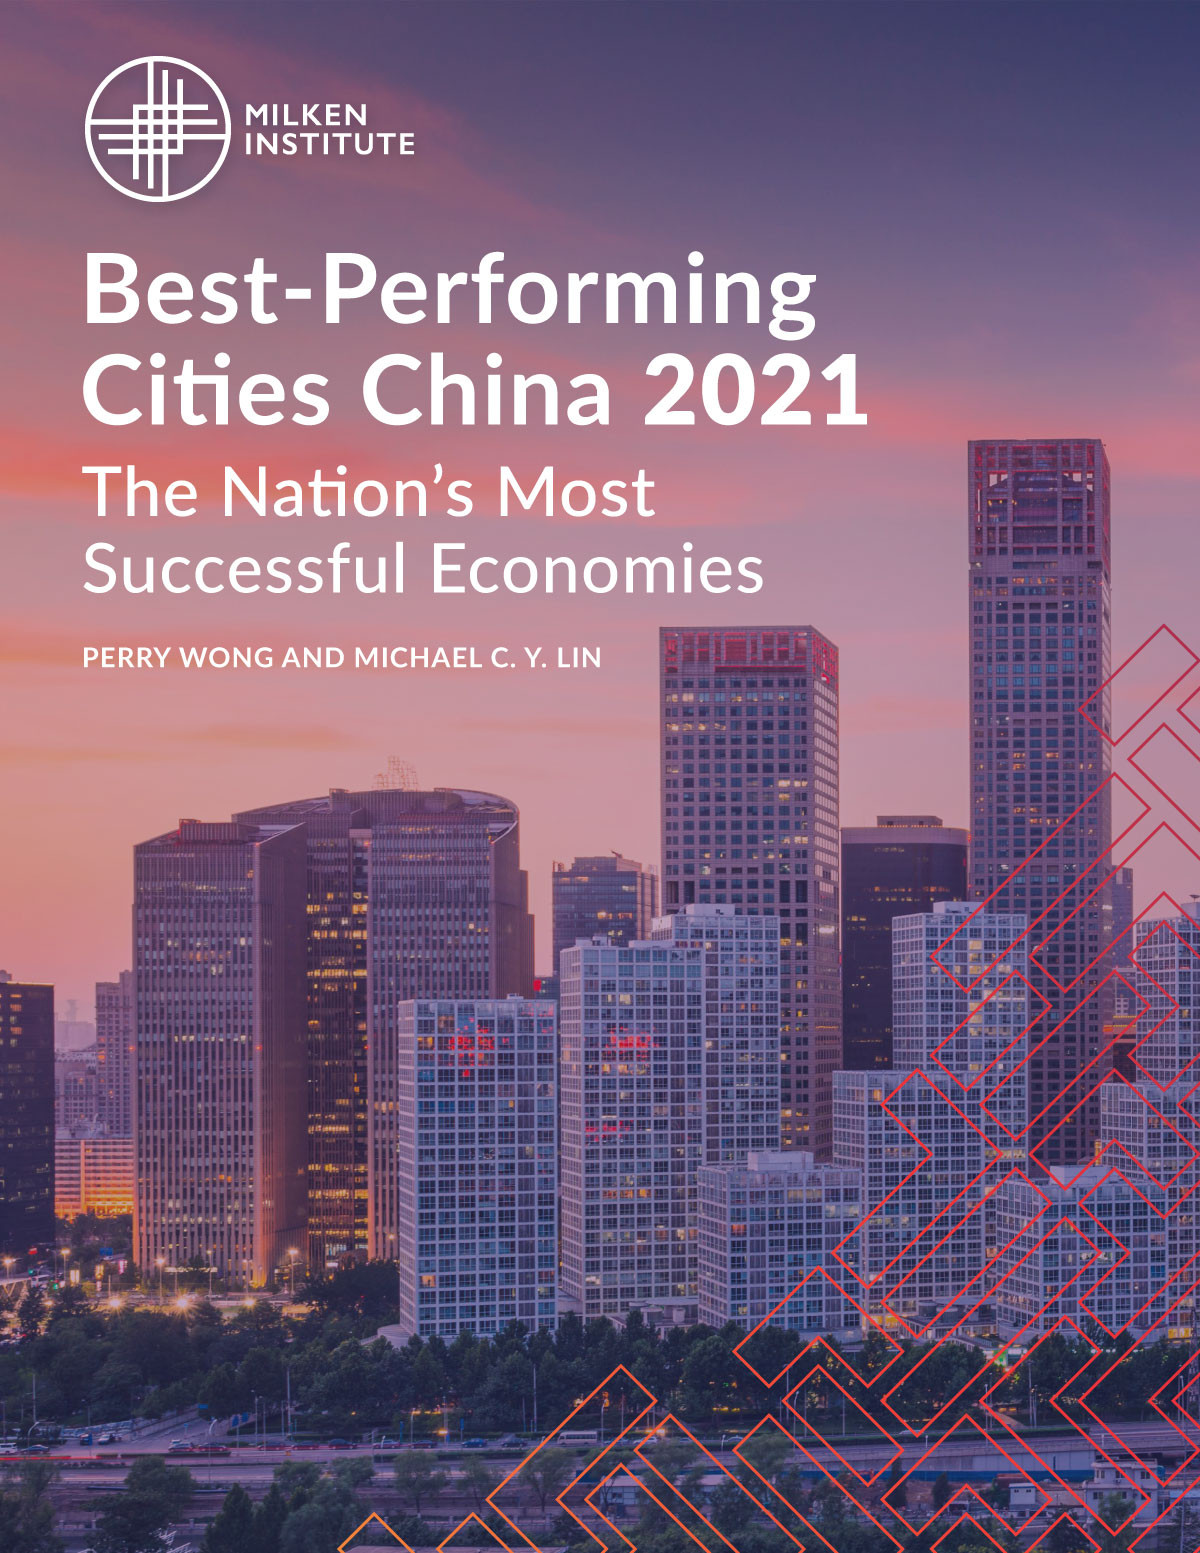 Best-Performing Cities China 2021